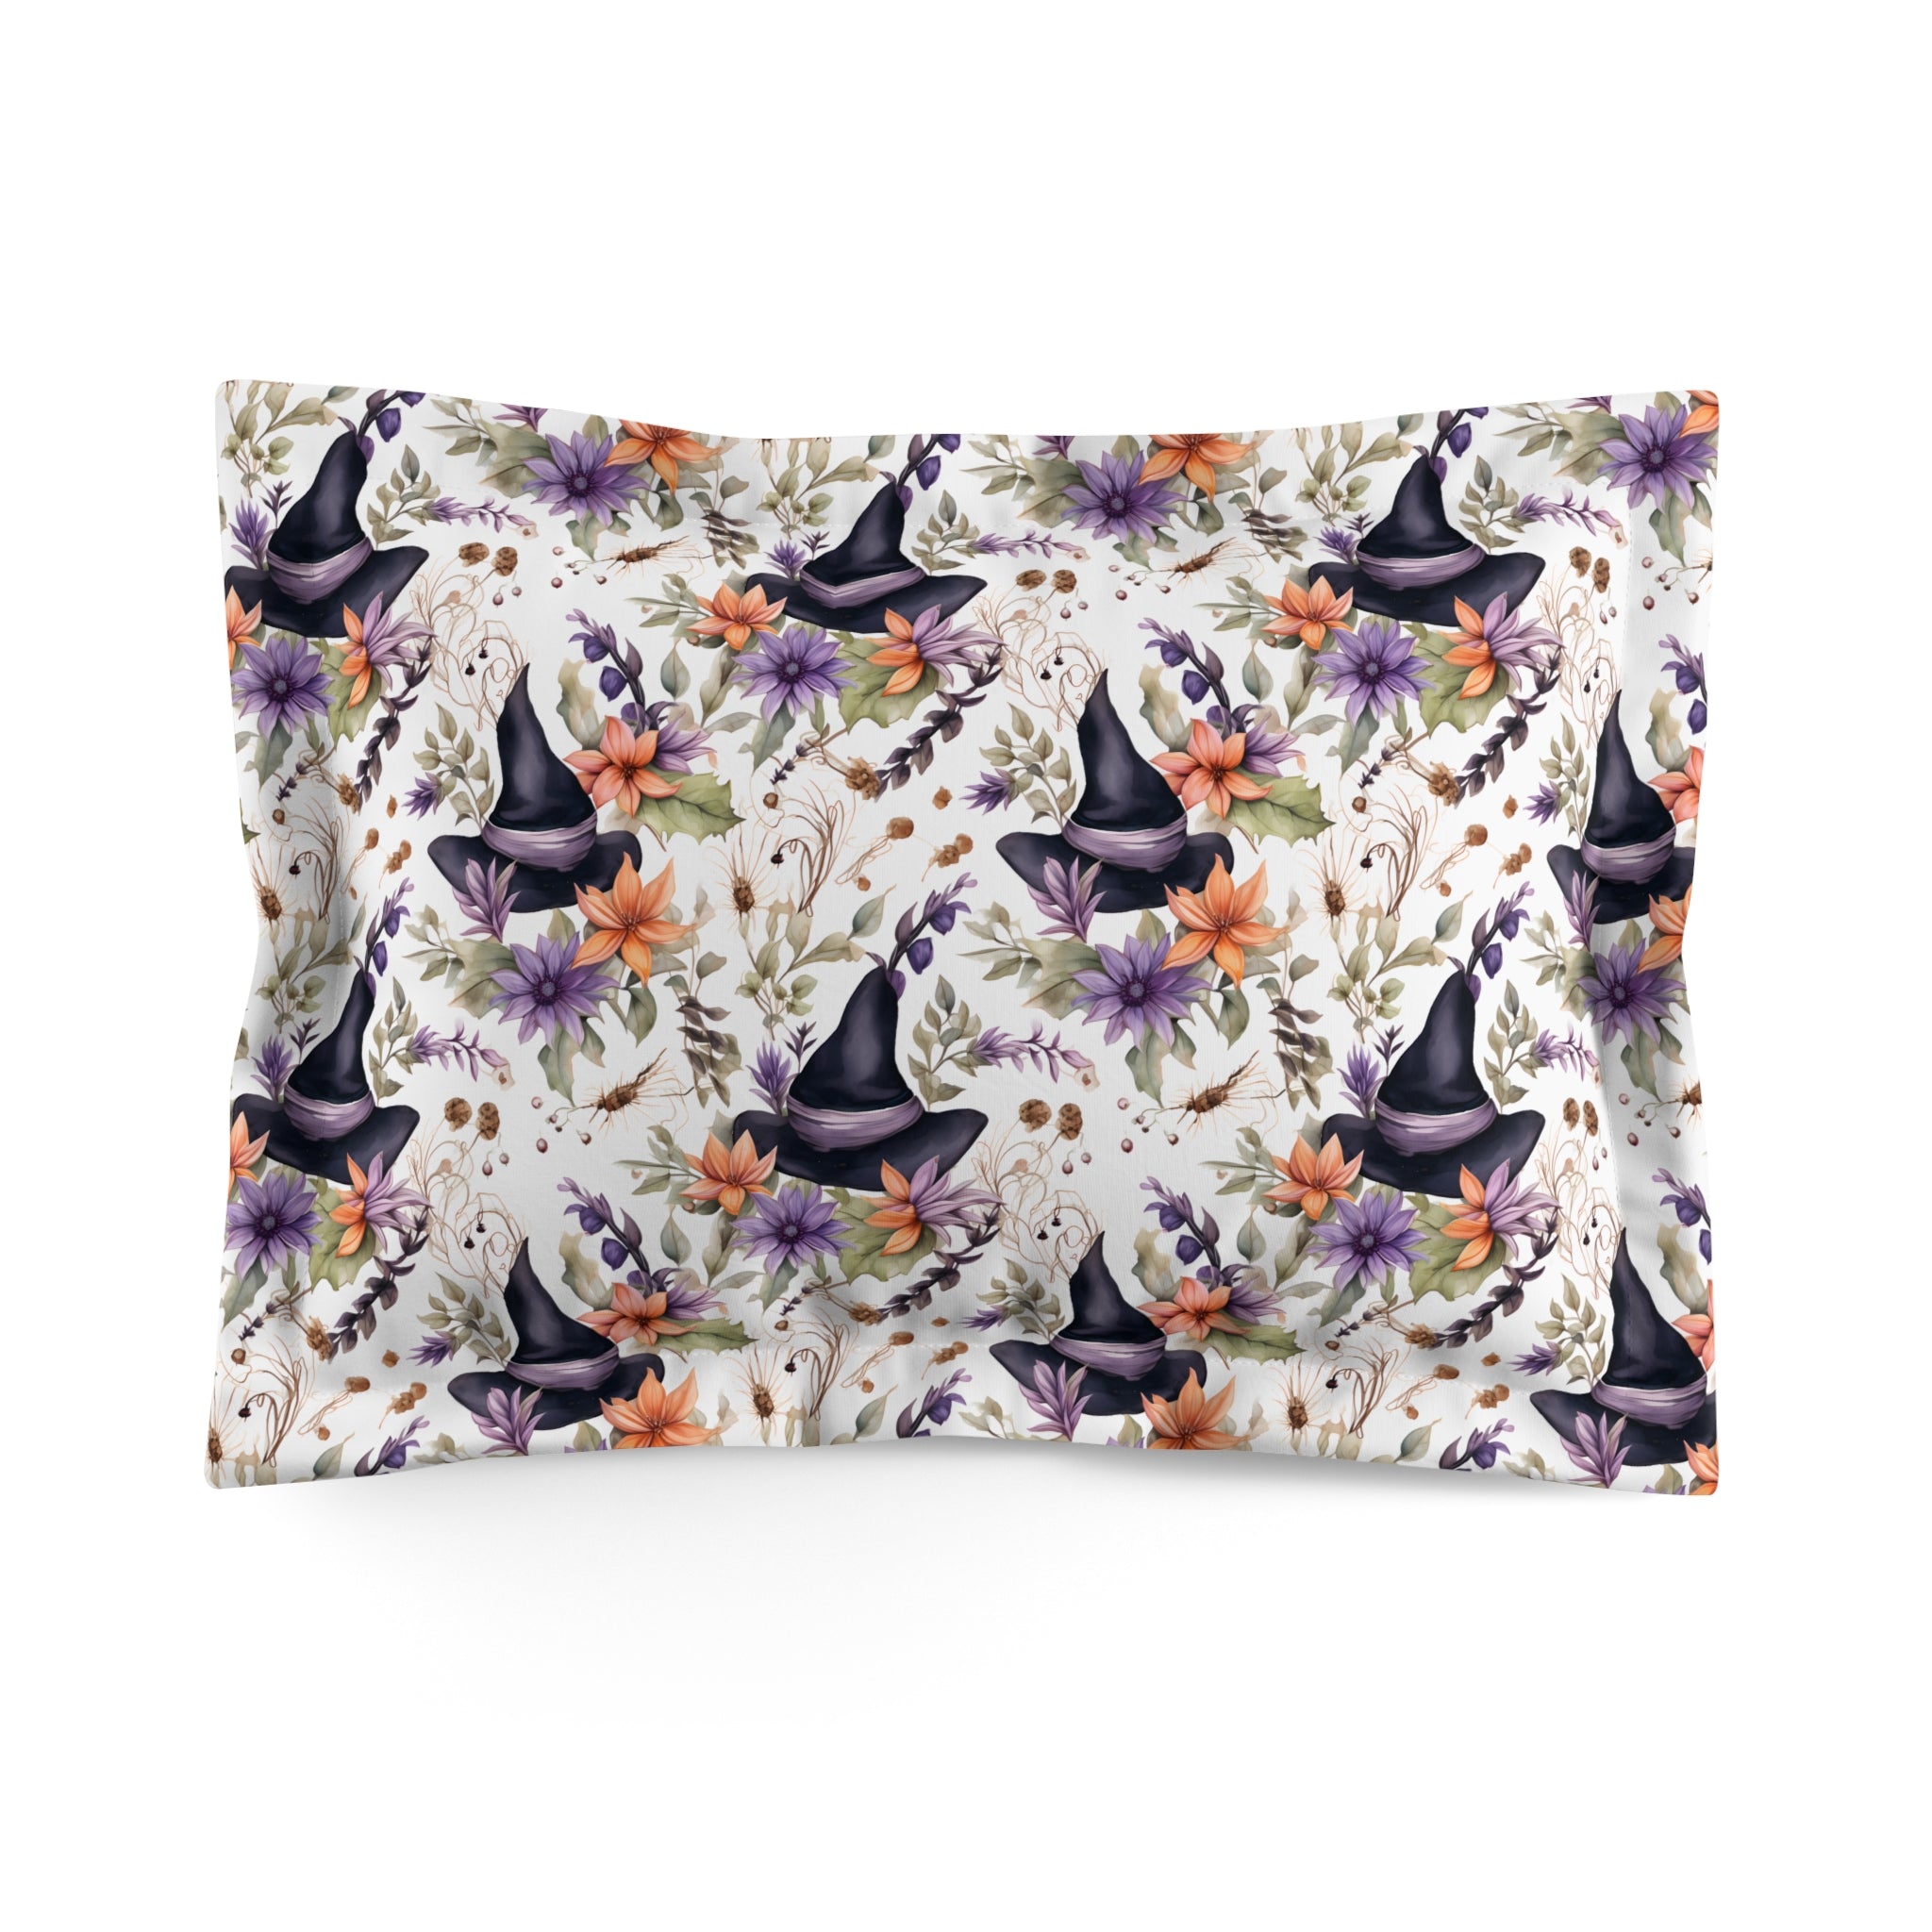 Floral Watercolor Witch Duvet Cover: Microfiber